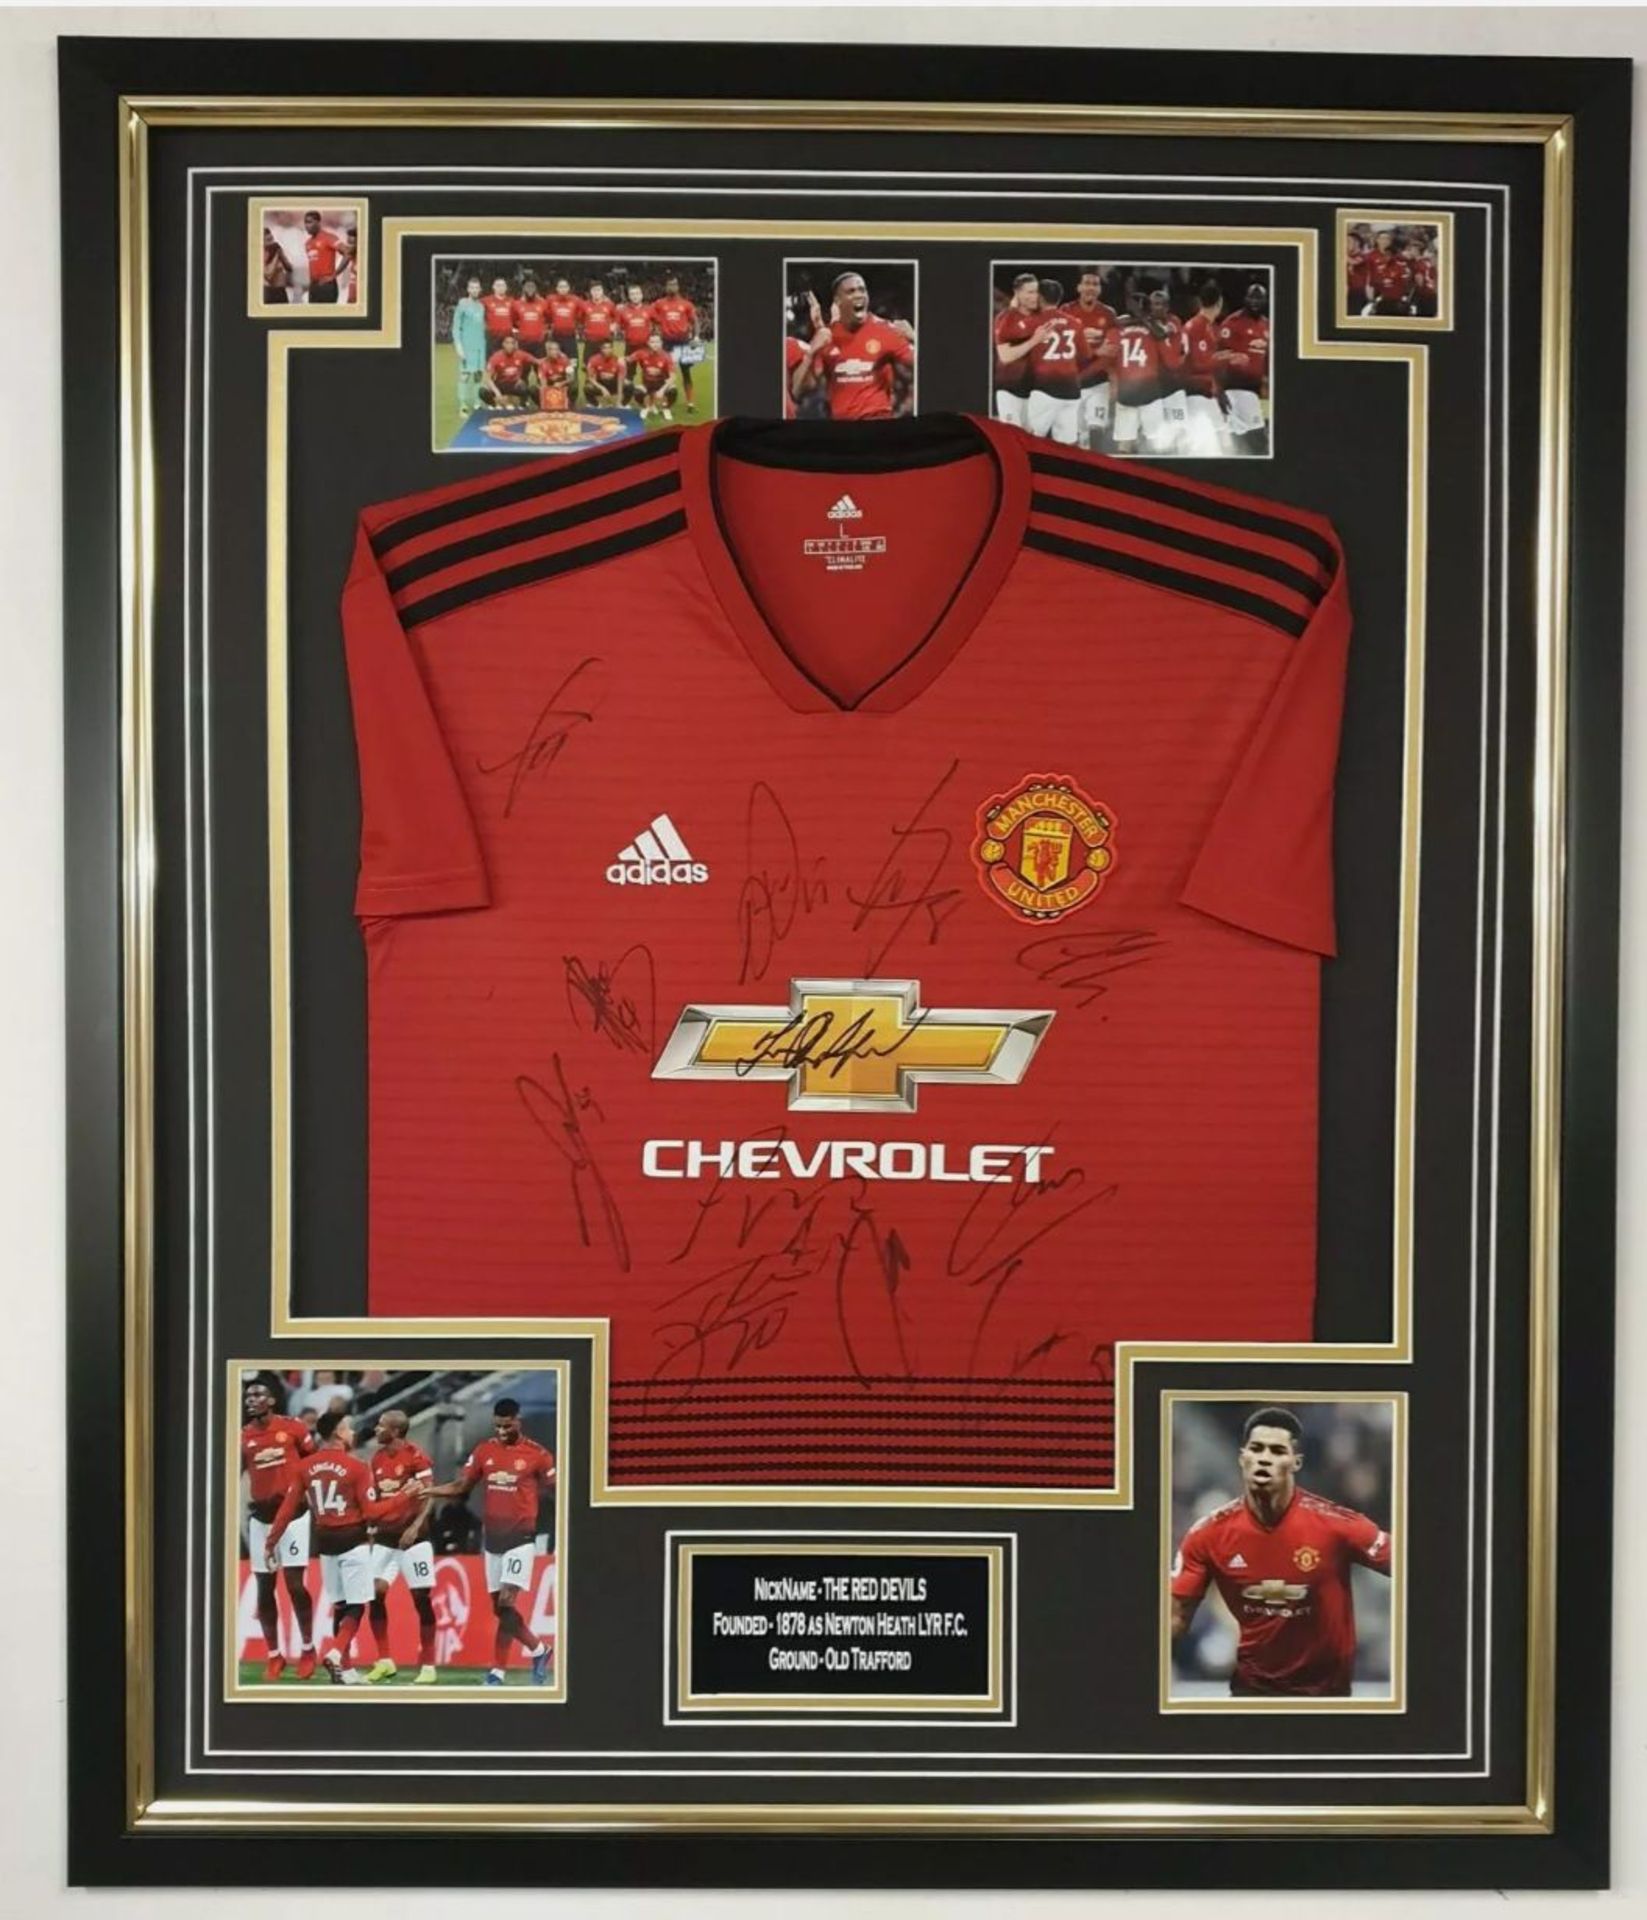 Framed Manchester United football shirt signed by Manchester United players  ** A cost of £15 will